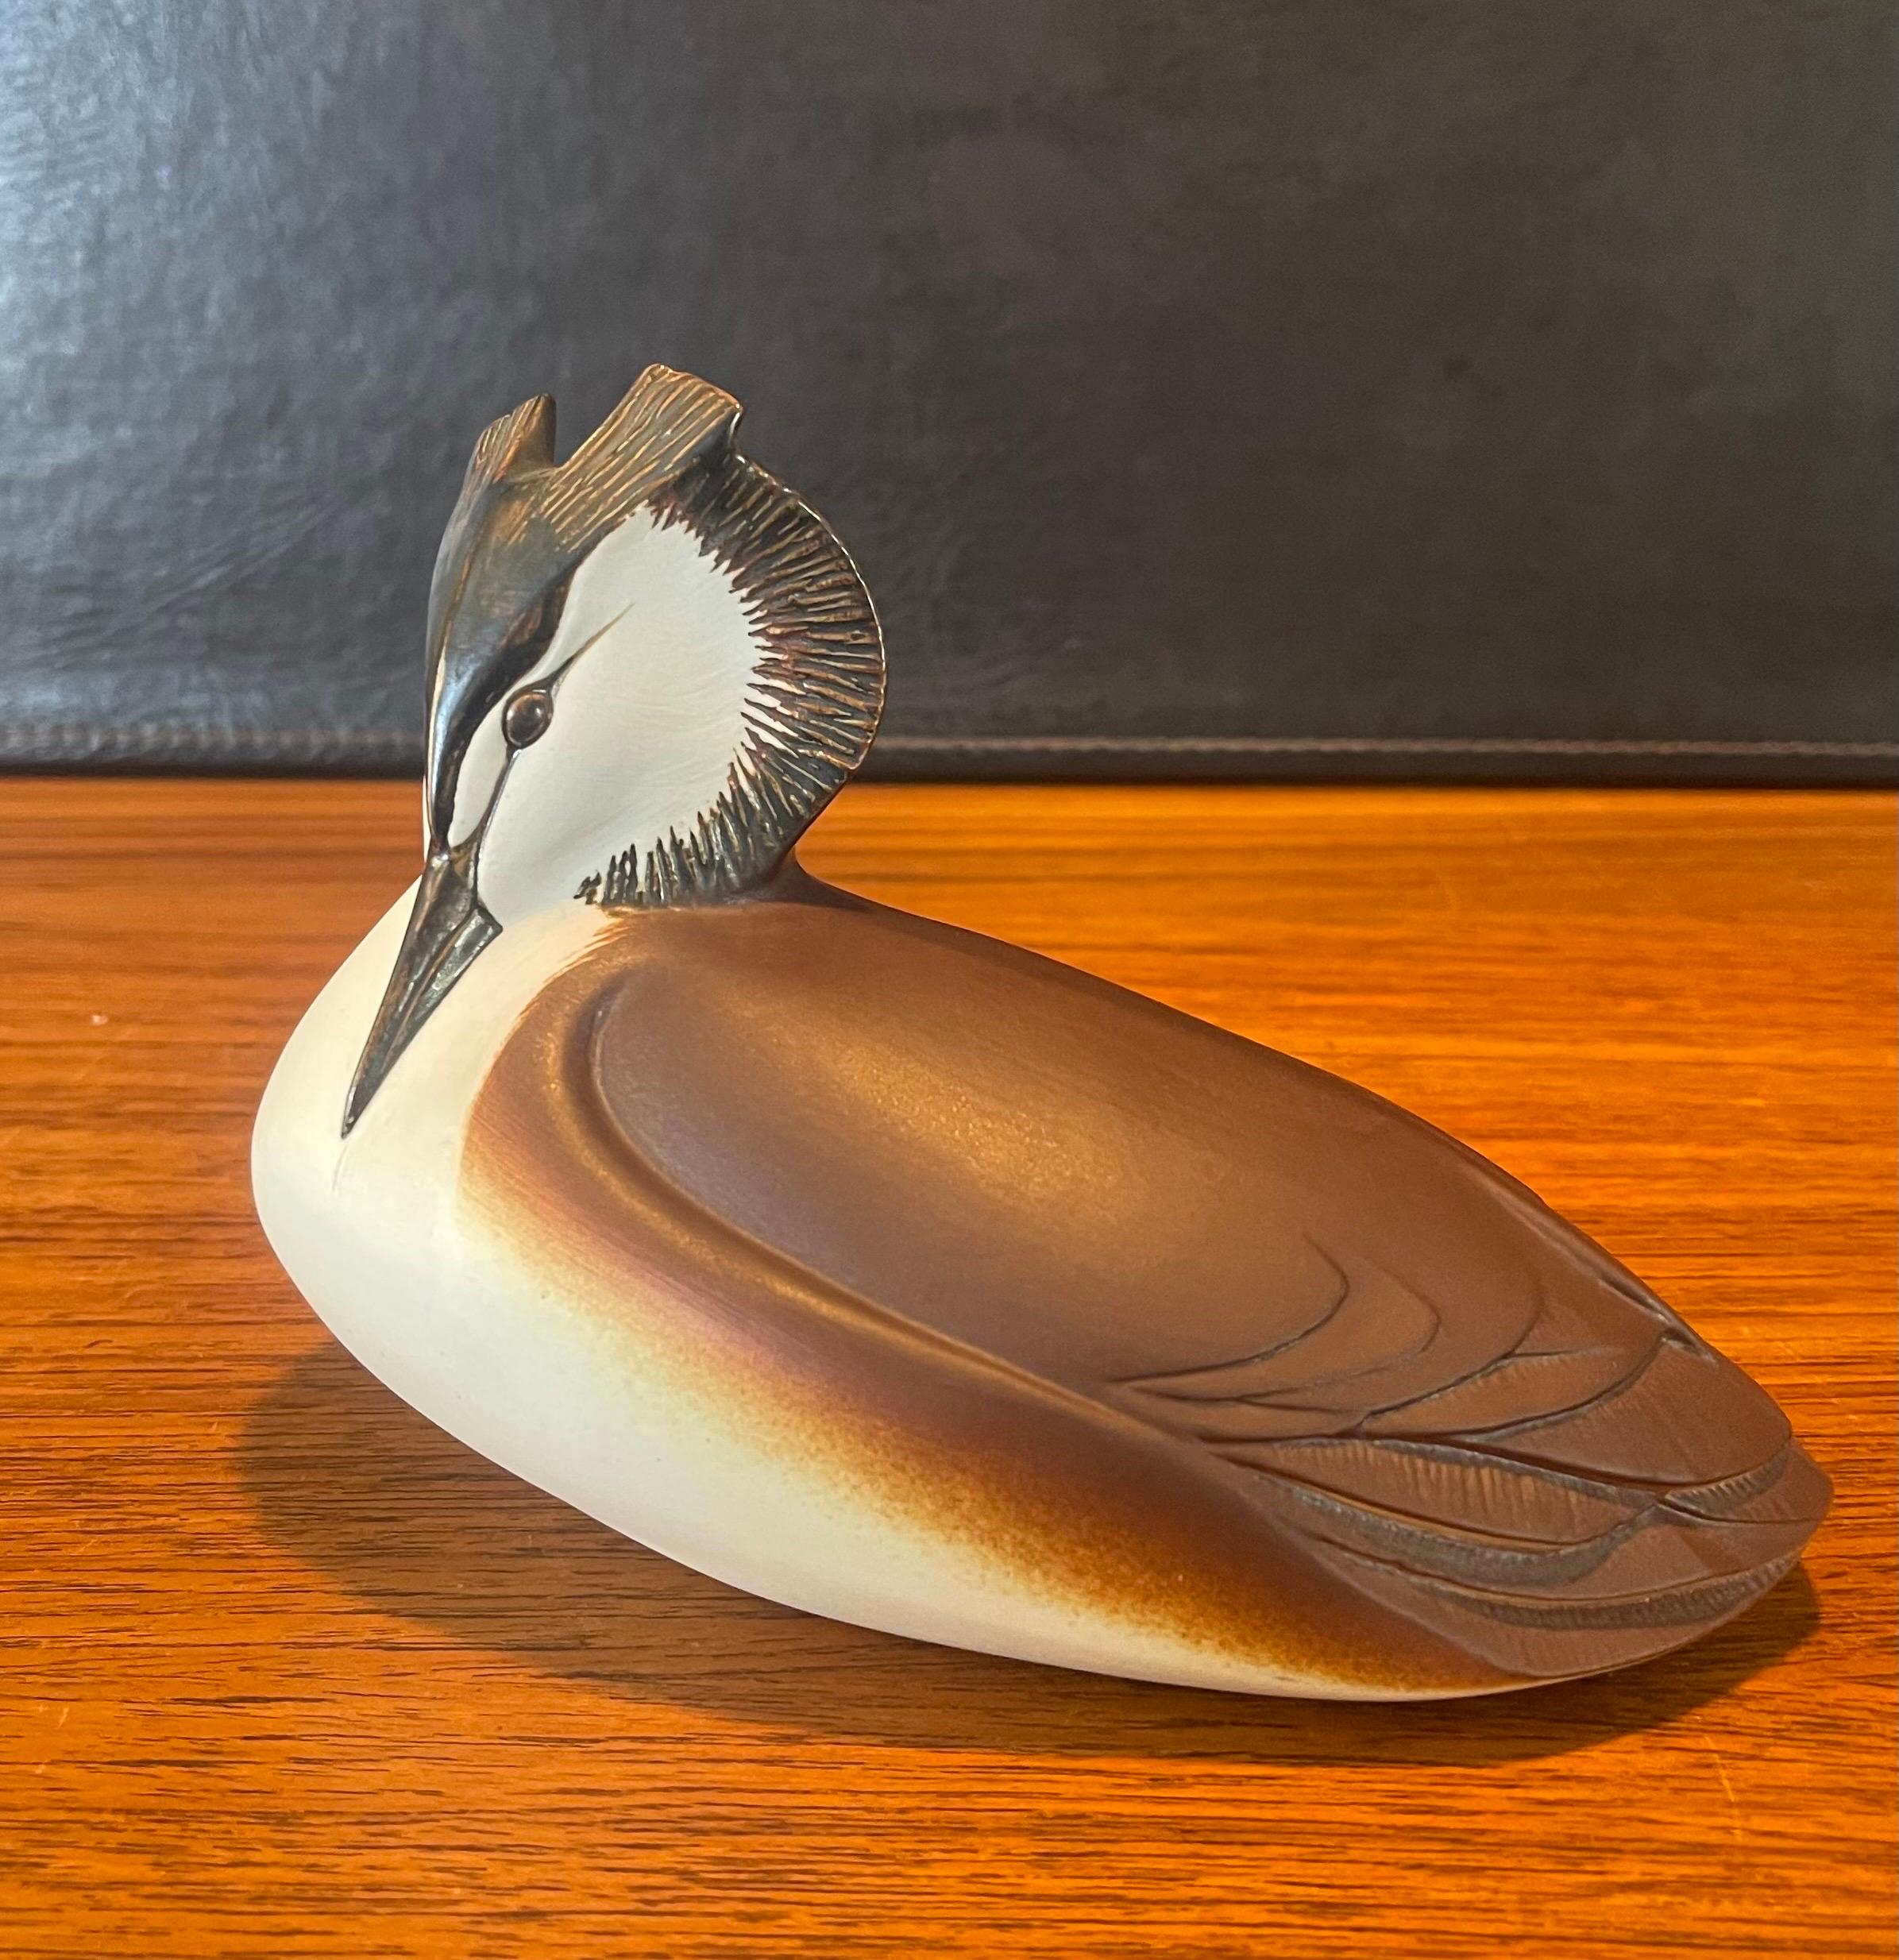 Vintage MCM ceramiche bird sculpture by Paul Hoff, circa 1960s. The piece is in very good vintage condition with great color and texture; it would make a fantastic addition to any mid-century collection. The bird measures 7